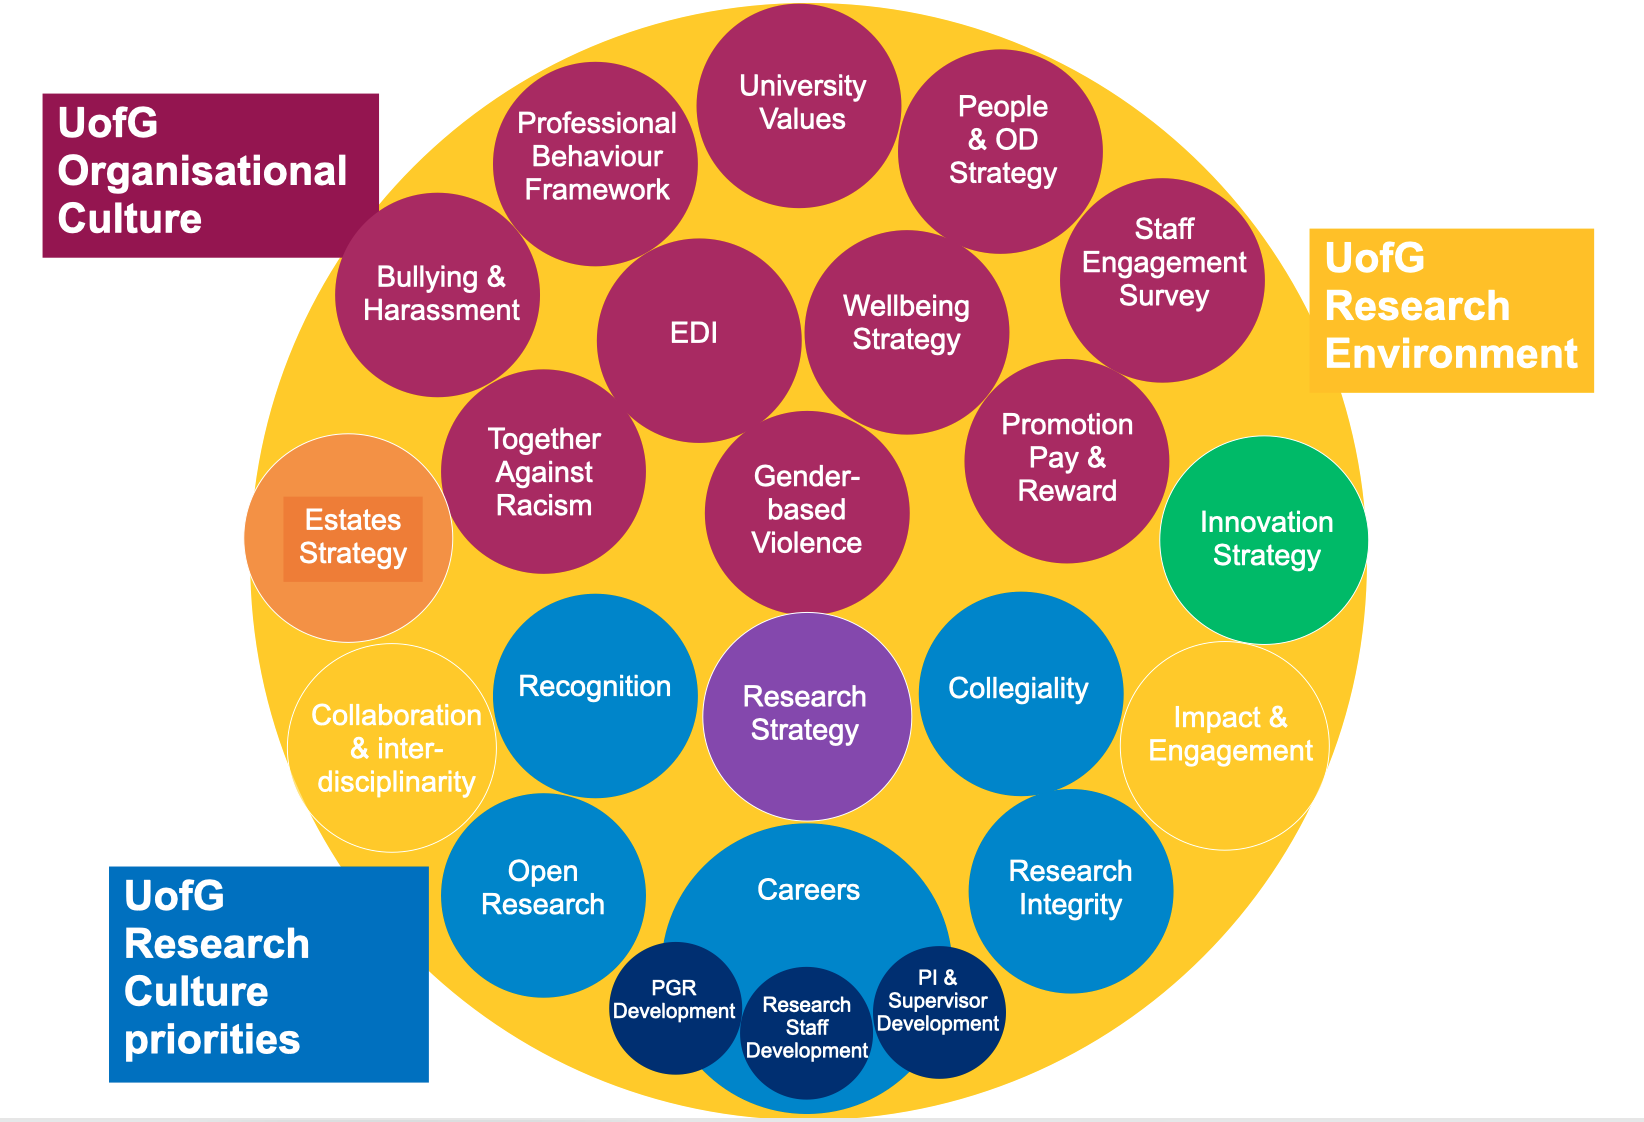 A complex diagram of different concepts presented as overlapping circles showing that the 5 research culture priorities are part of a complex web of organisational priorities